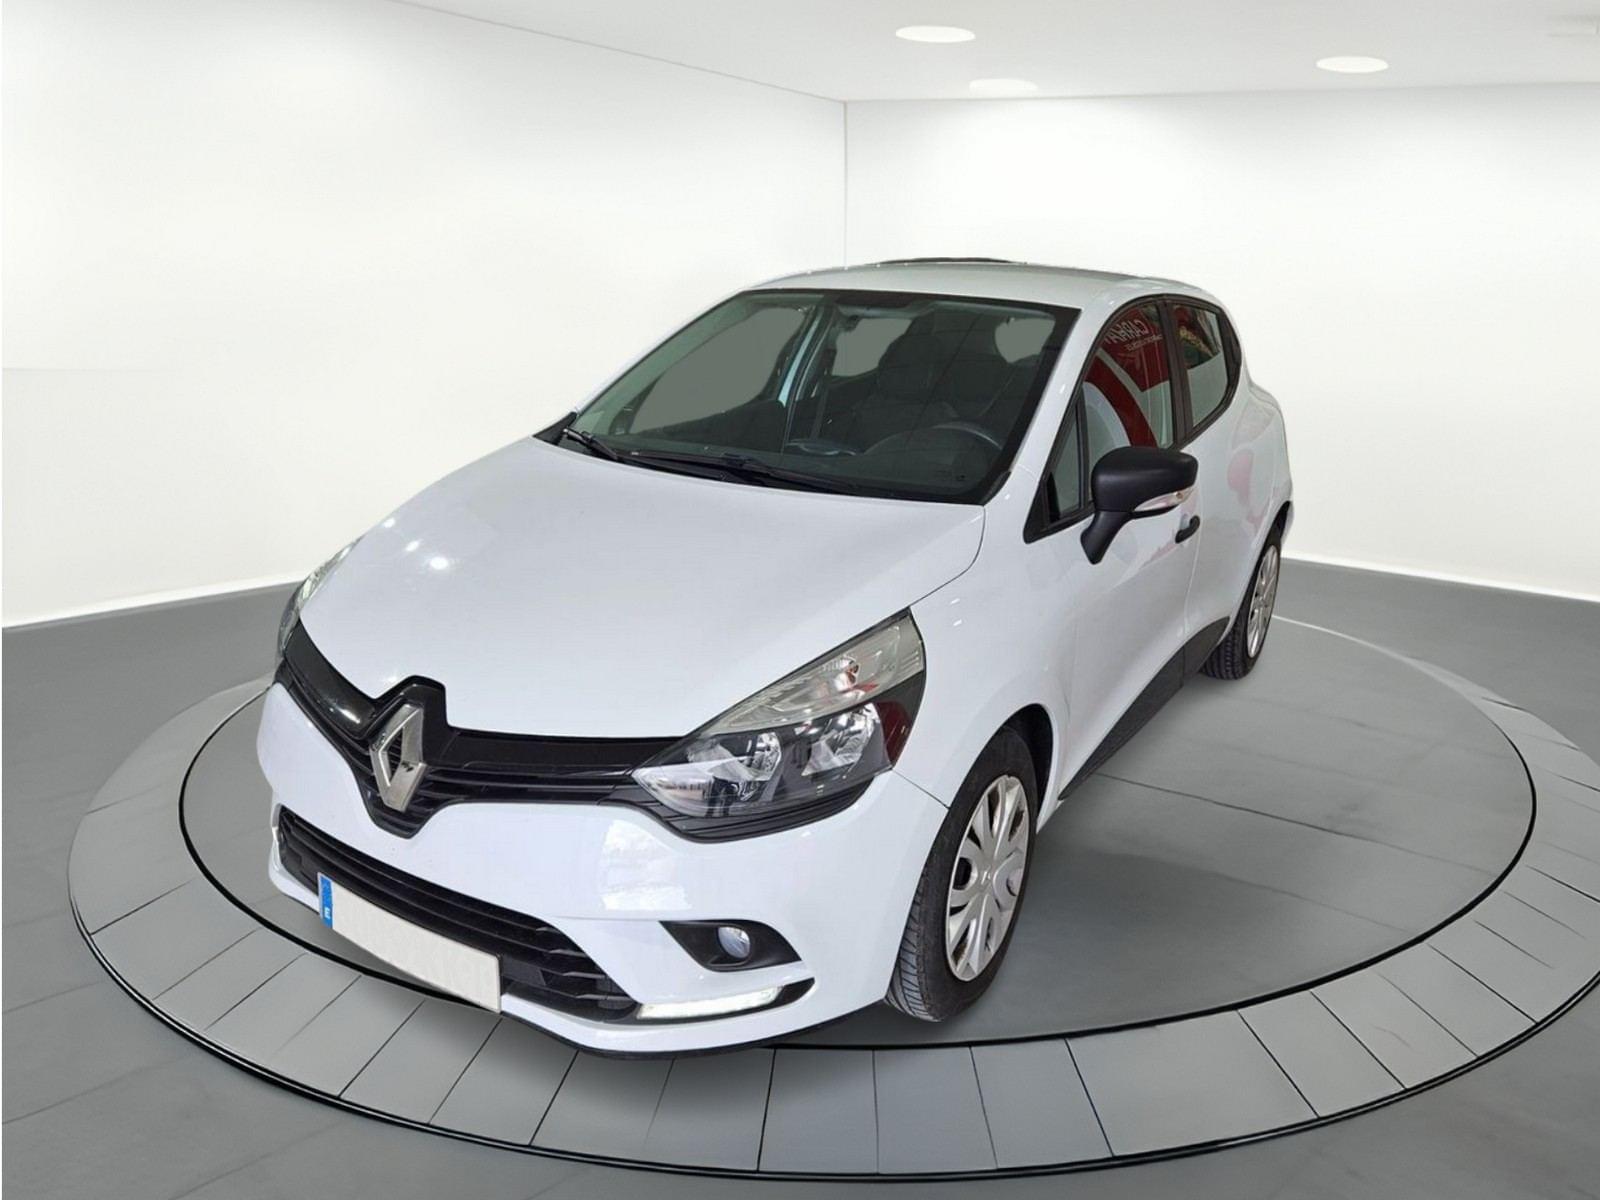 RENAULT CLIO 1.5 DCI SS ENERGY BUSINESS 55KW 1 